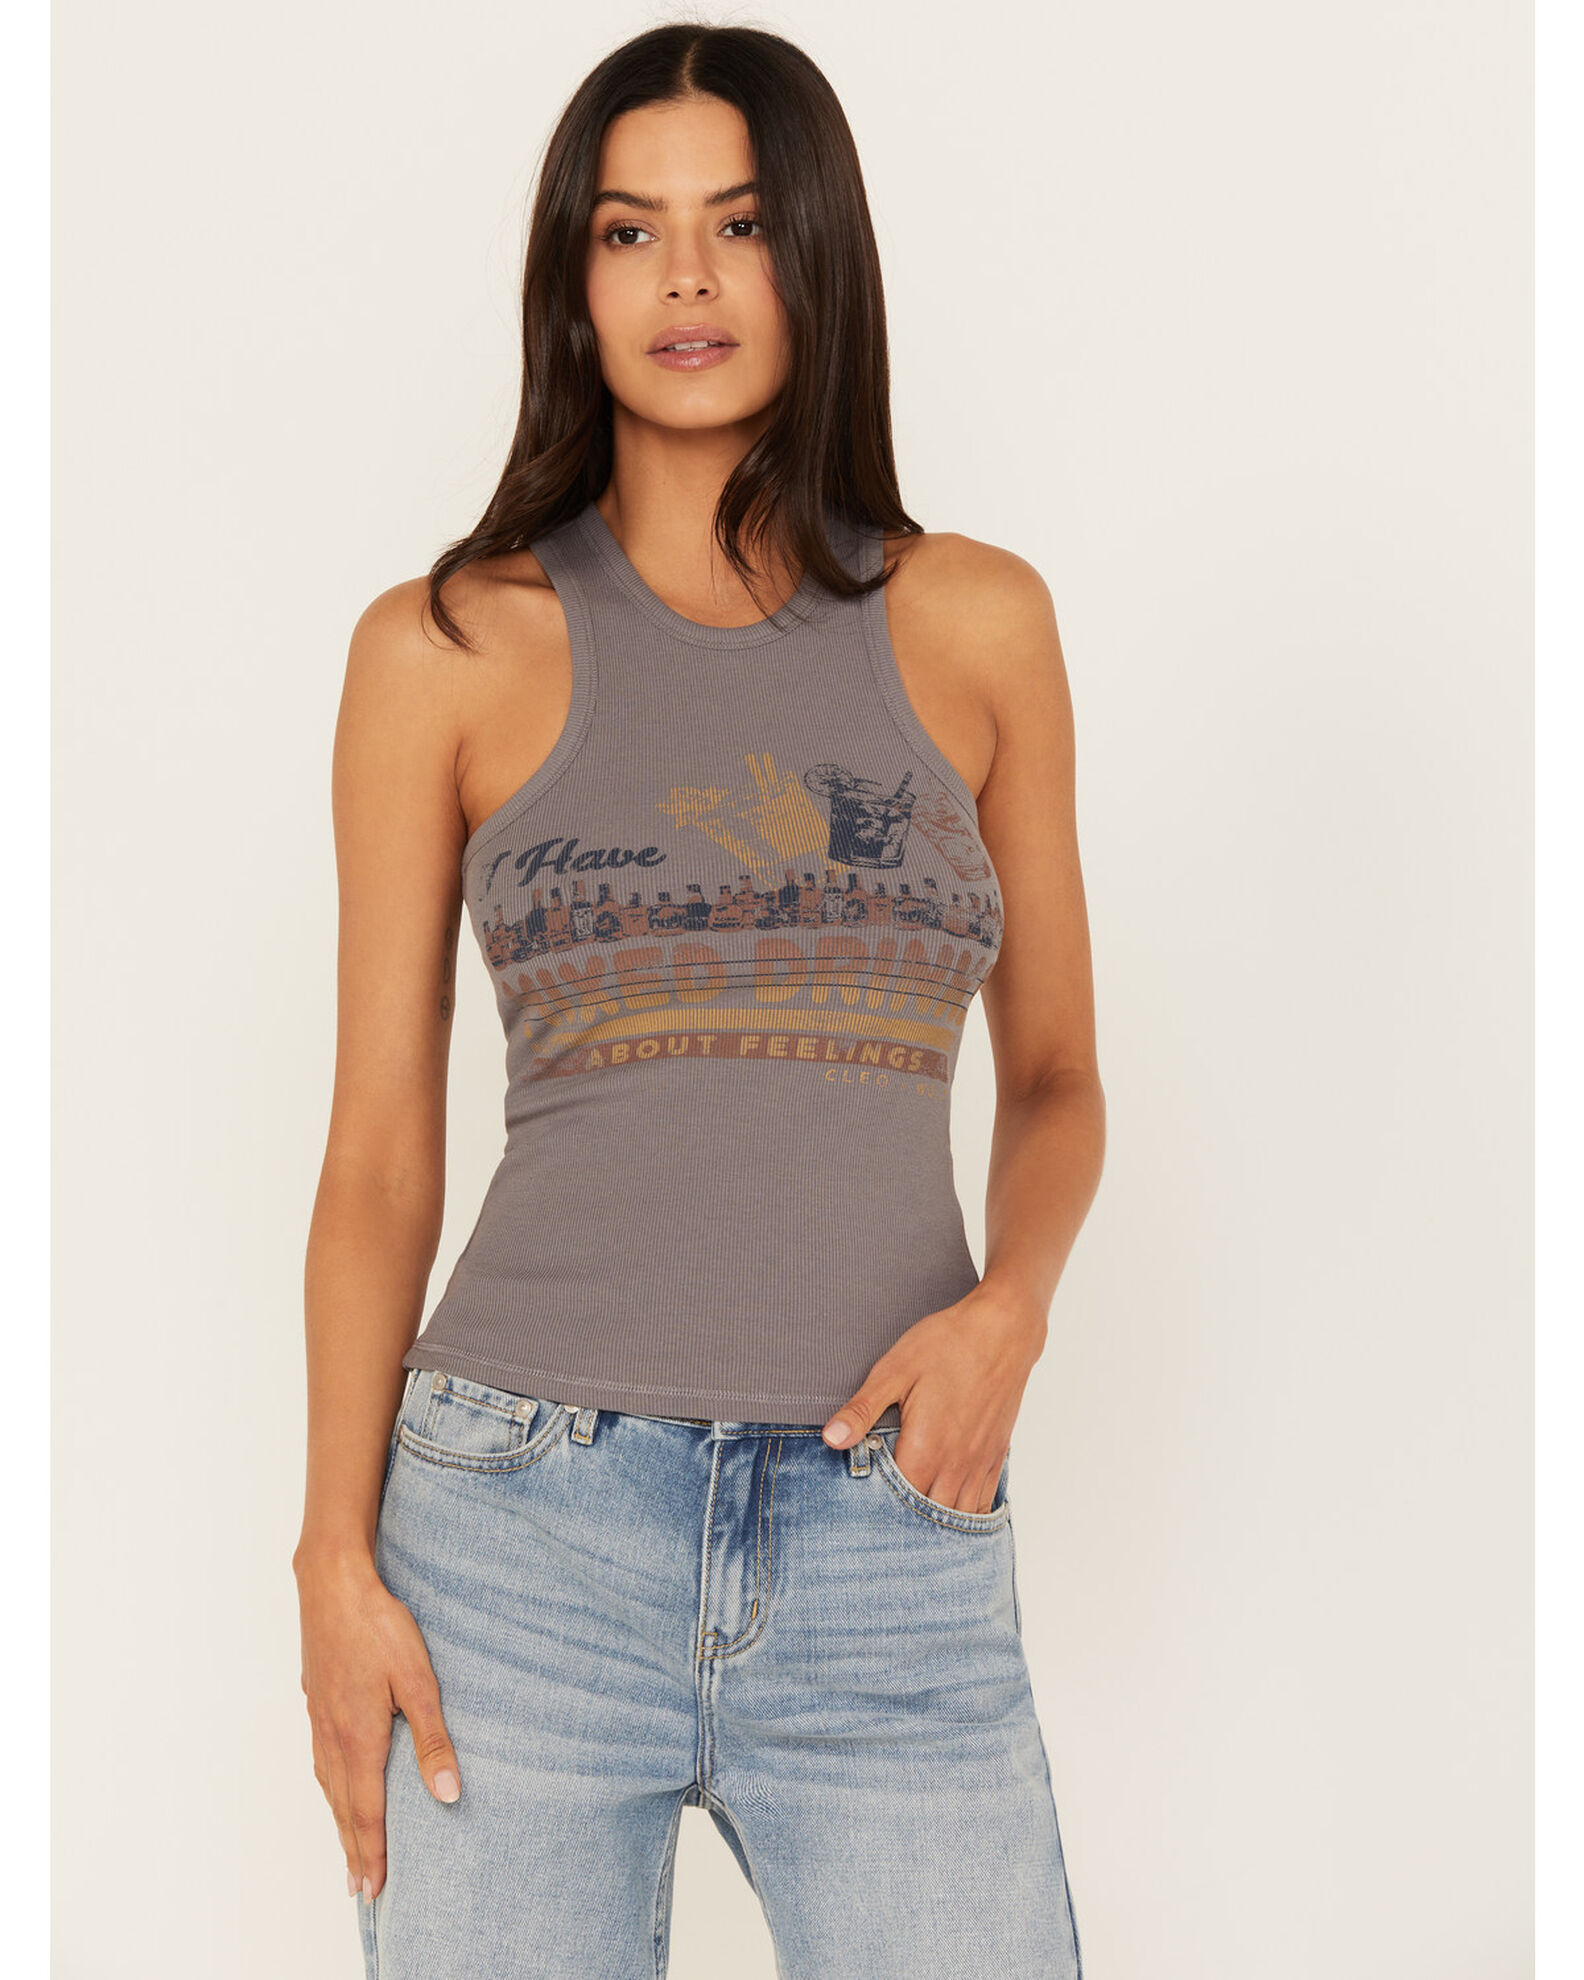 Cleo + Wolf Women's Mixed Drinks Graphic Tank